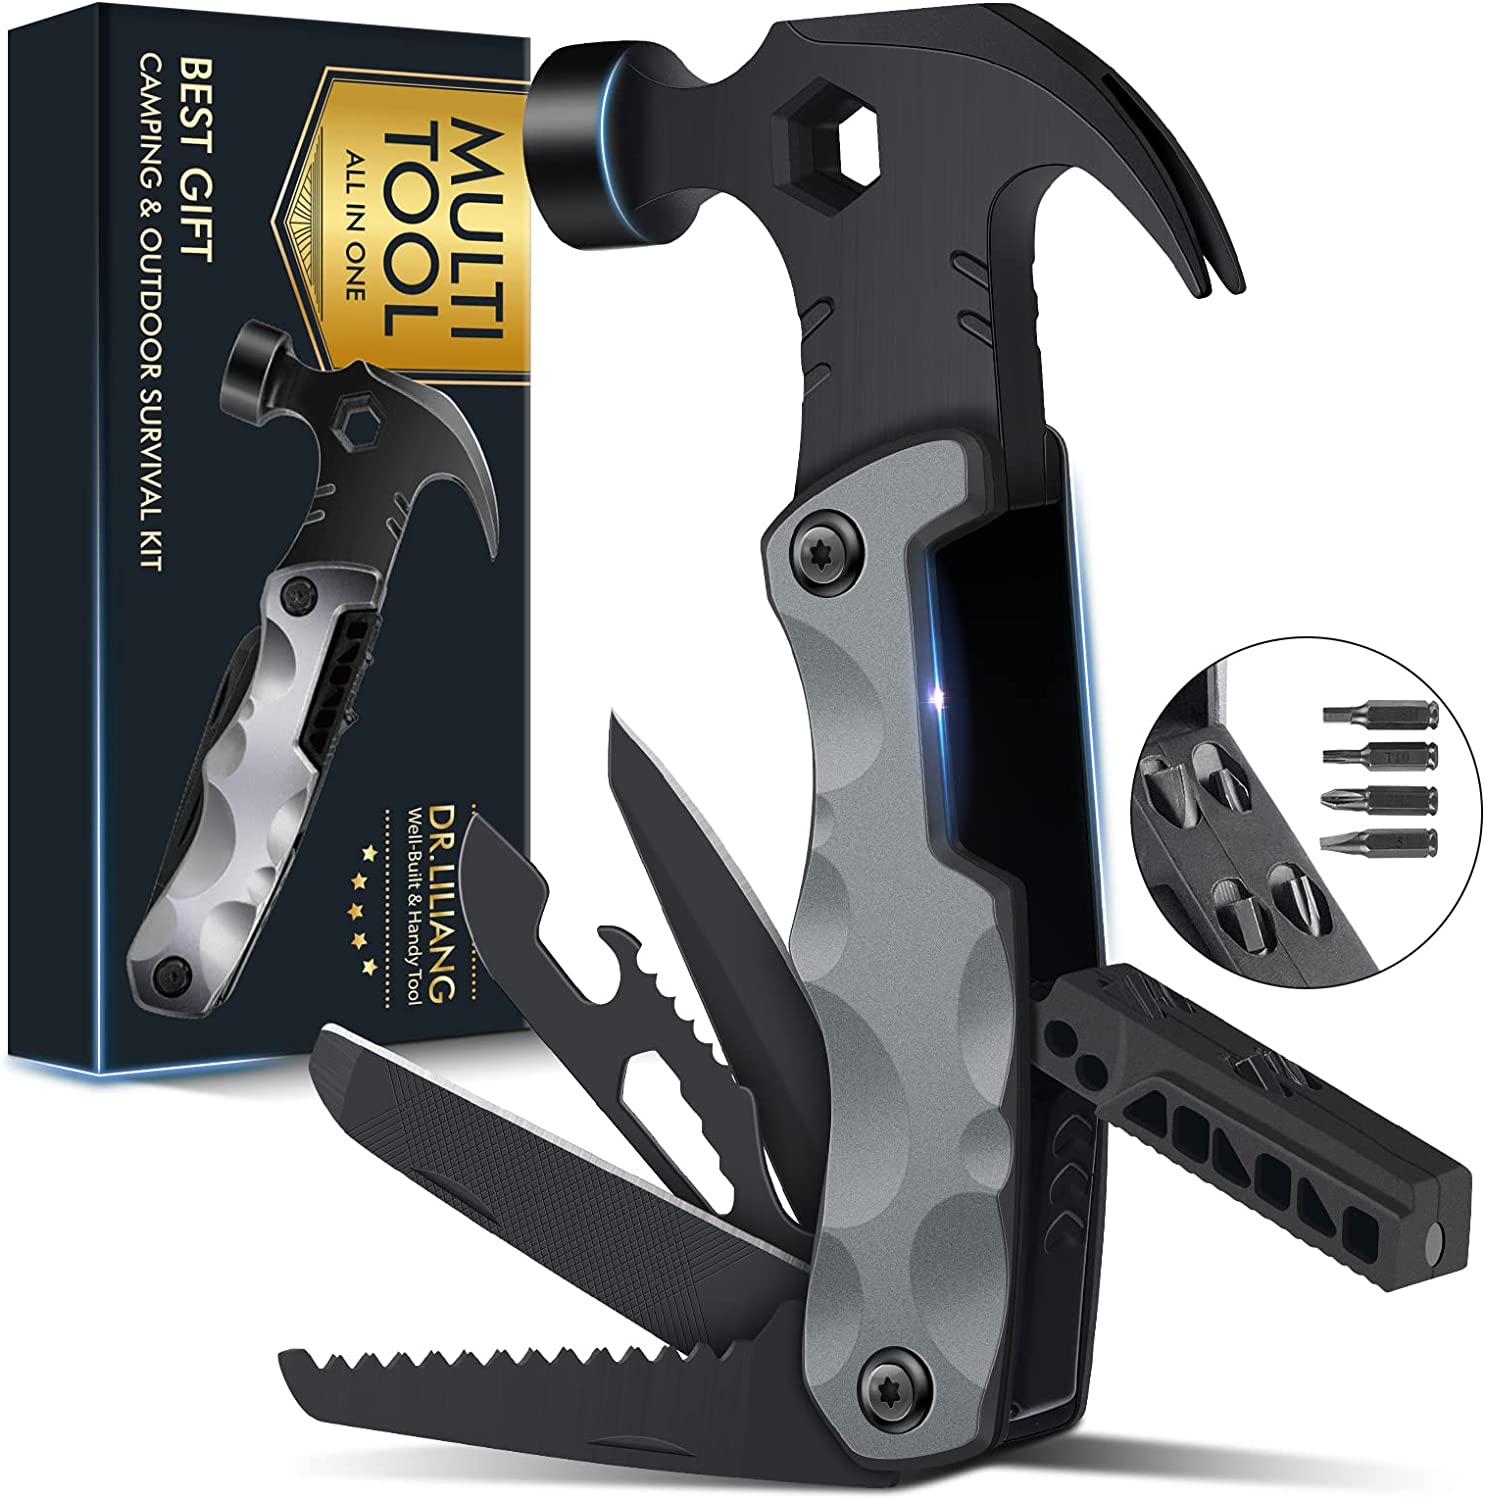 Multitool Camping Accessories Stocking Stuffers for Men Dad Gifts, 13 In 1 Survival Multi Tools Hammer Christmas Cool Gadgets for Him Boyfriend Husband Grandpa Women Birthday Valentines Fathers Day